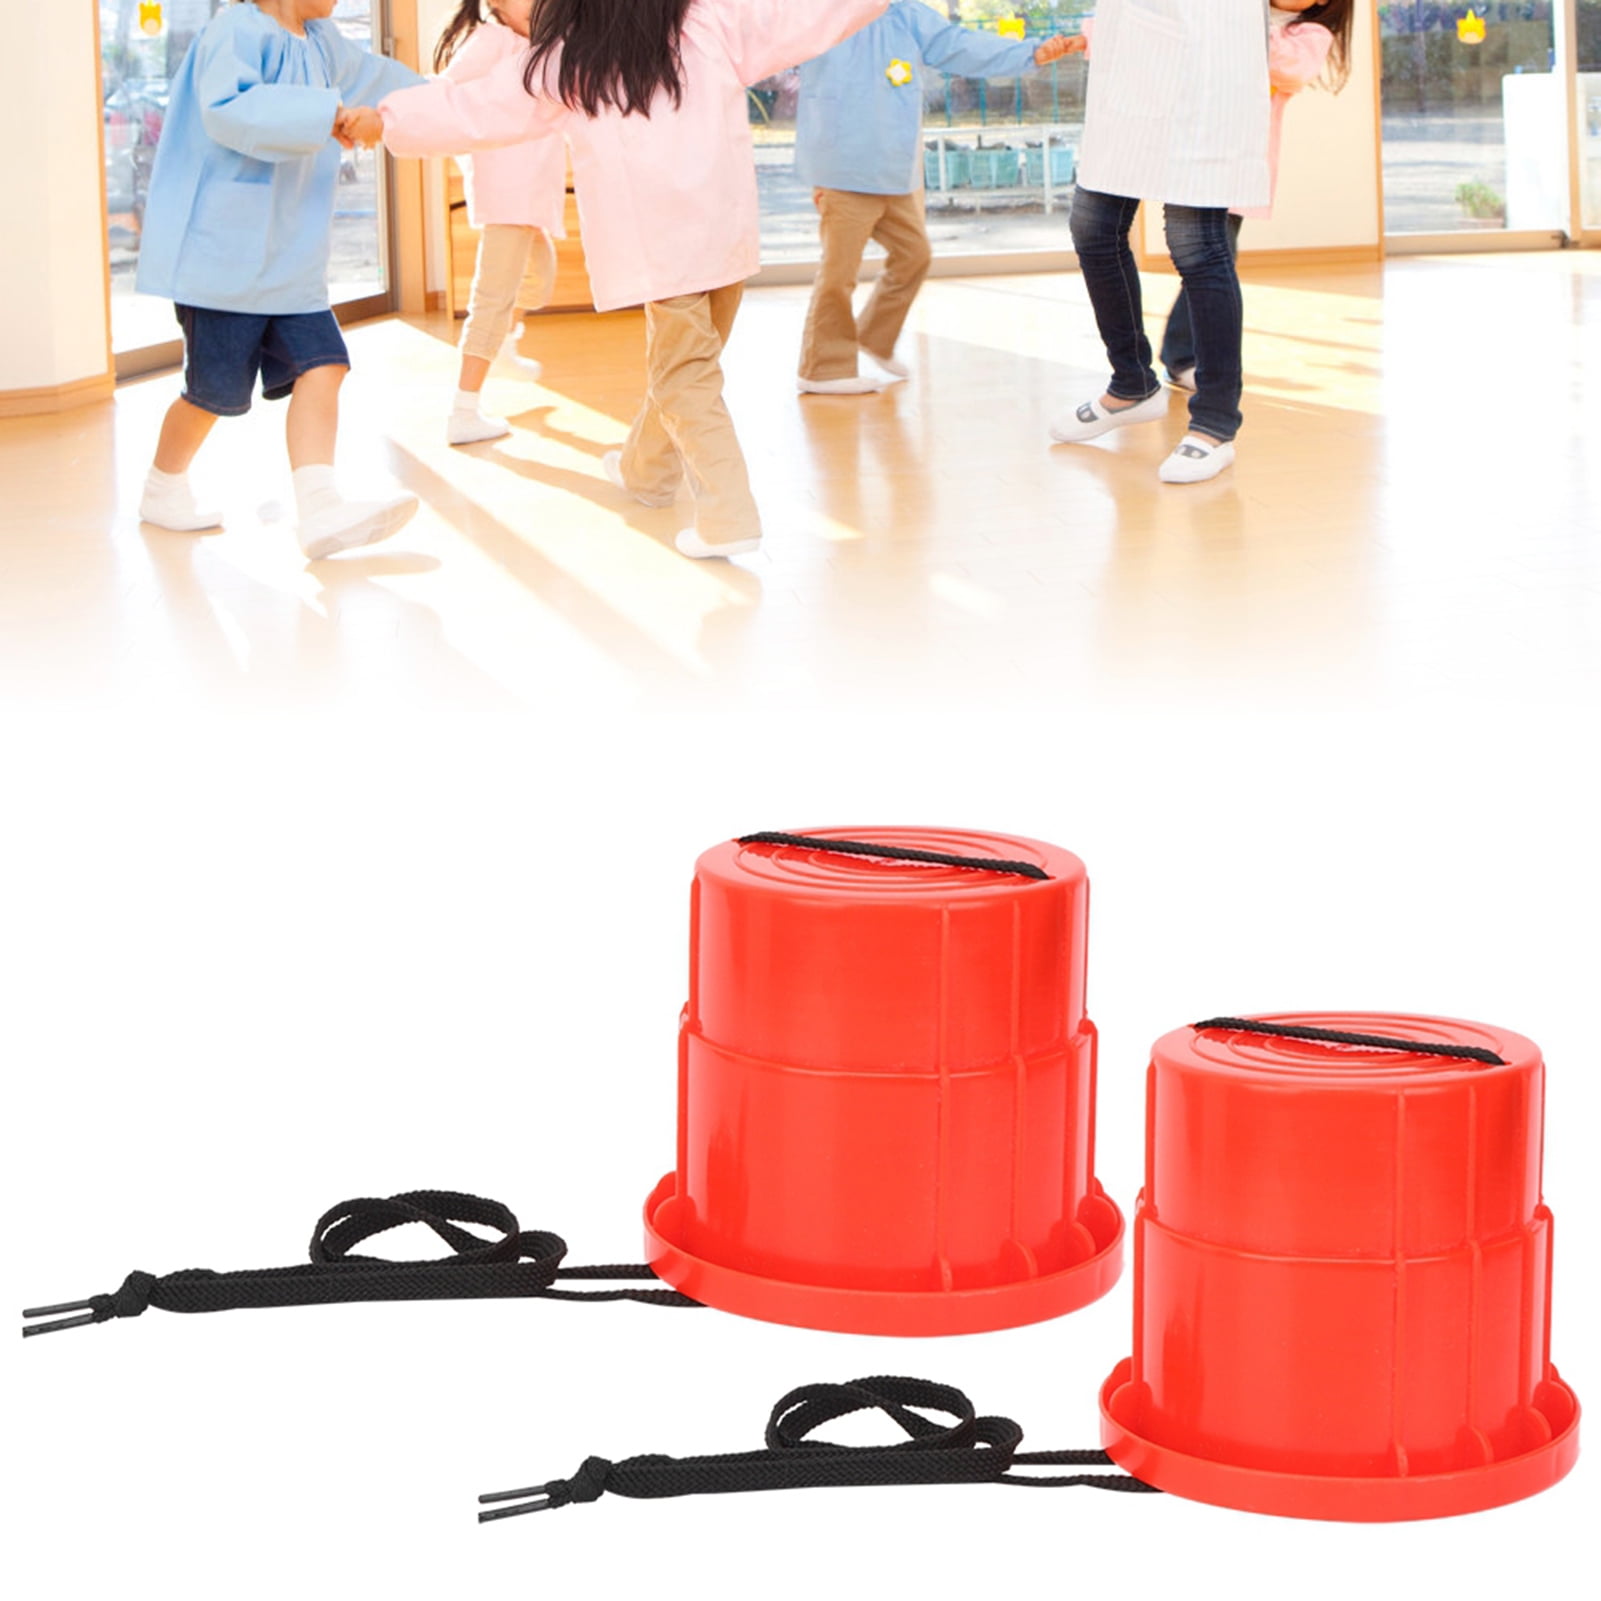  12 Pairs Balancing Stilts for Kids Walking Bucket Stilts  Plastic Walking Stilts Toy with Adjustable Rope for Preschool Playground  Indoor Outdoor Obstacle Course Games, Red, Yellow, Green, Blue : Toys 